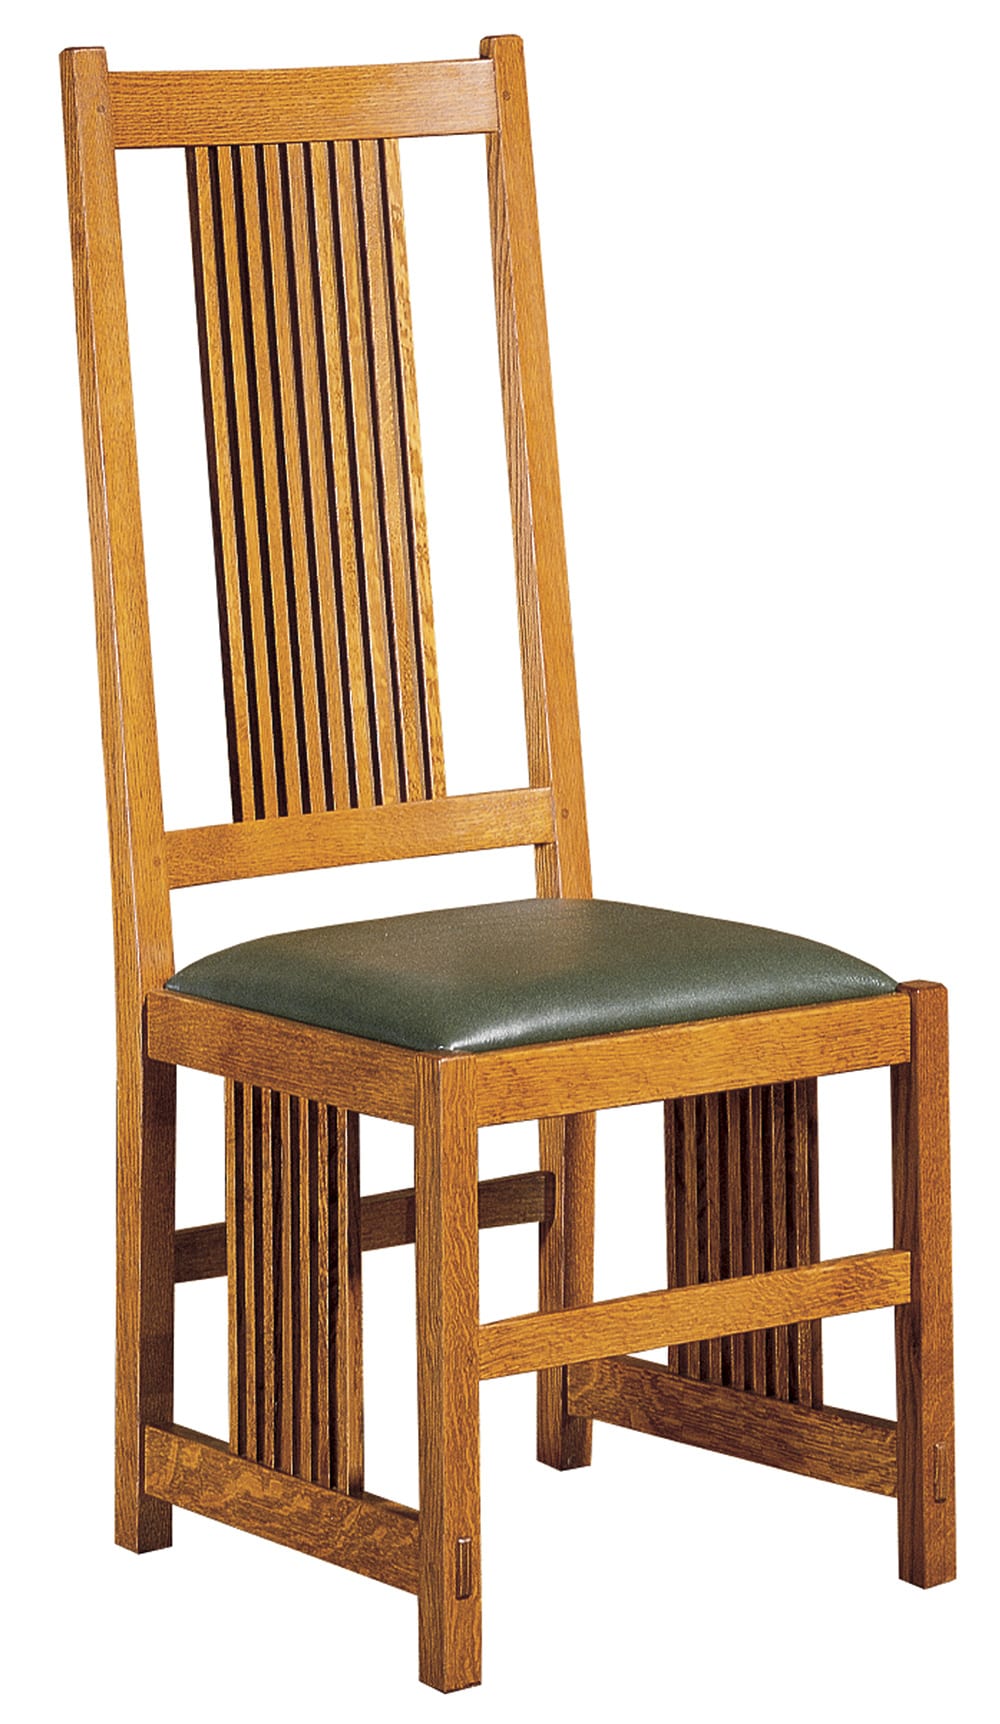 Spindle Side Chair - Stickley Brand